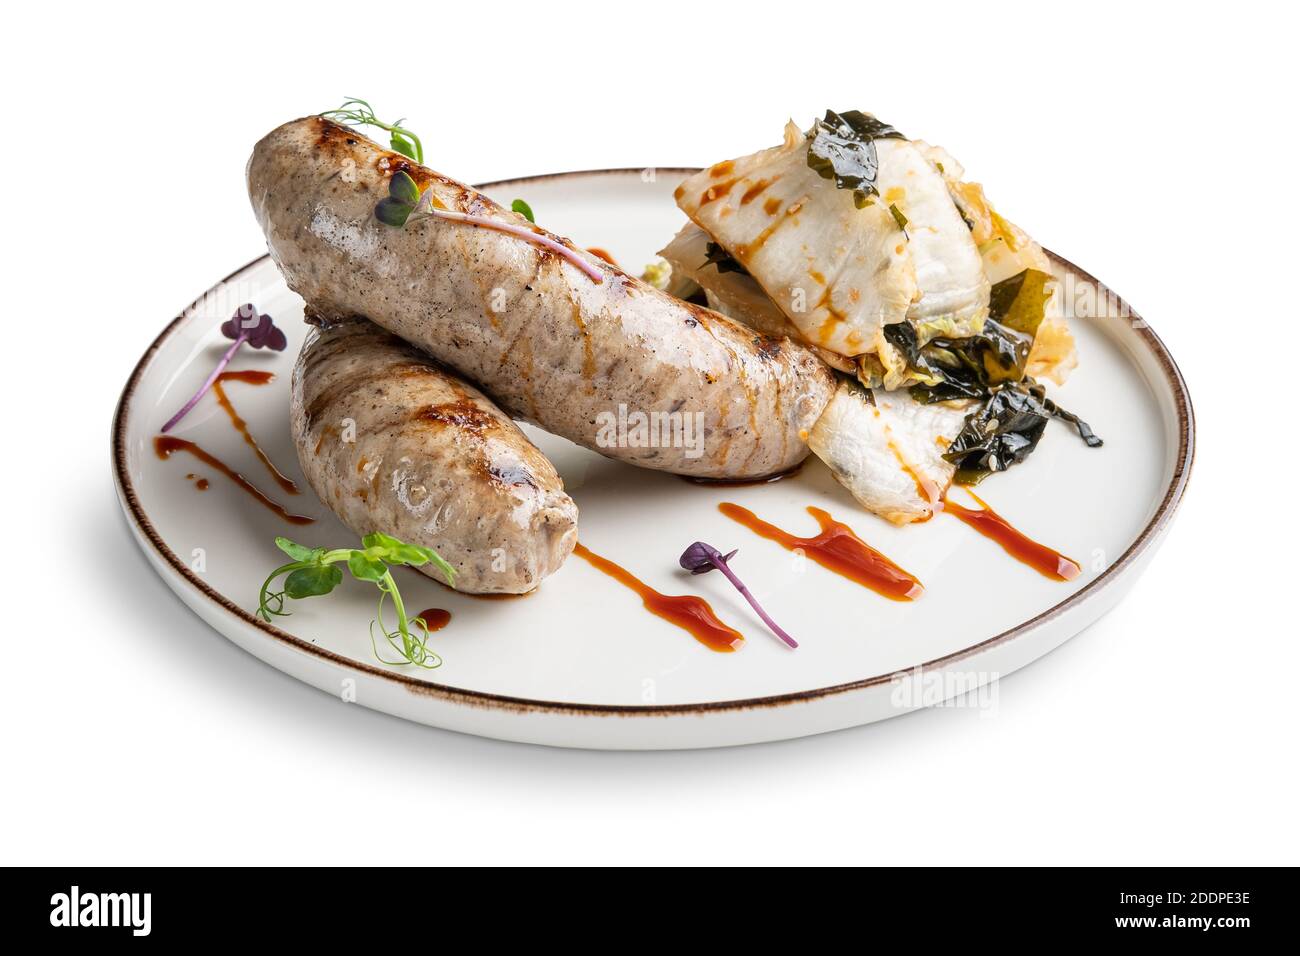 Fried Weisswurst (white veal sausage) with marinated cabbage and sea wed Stock Photo